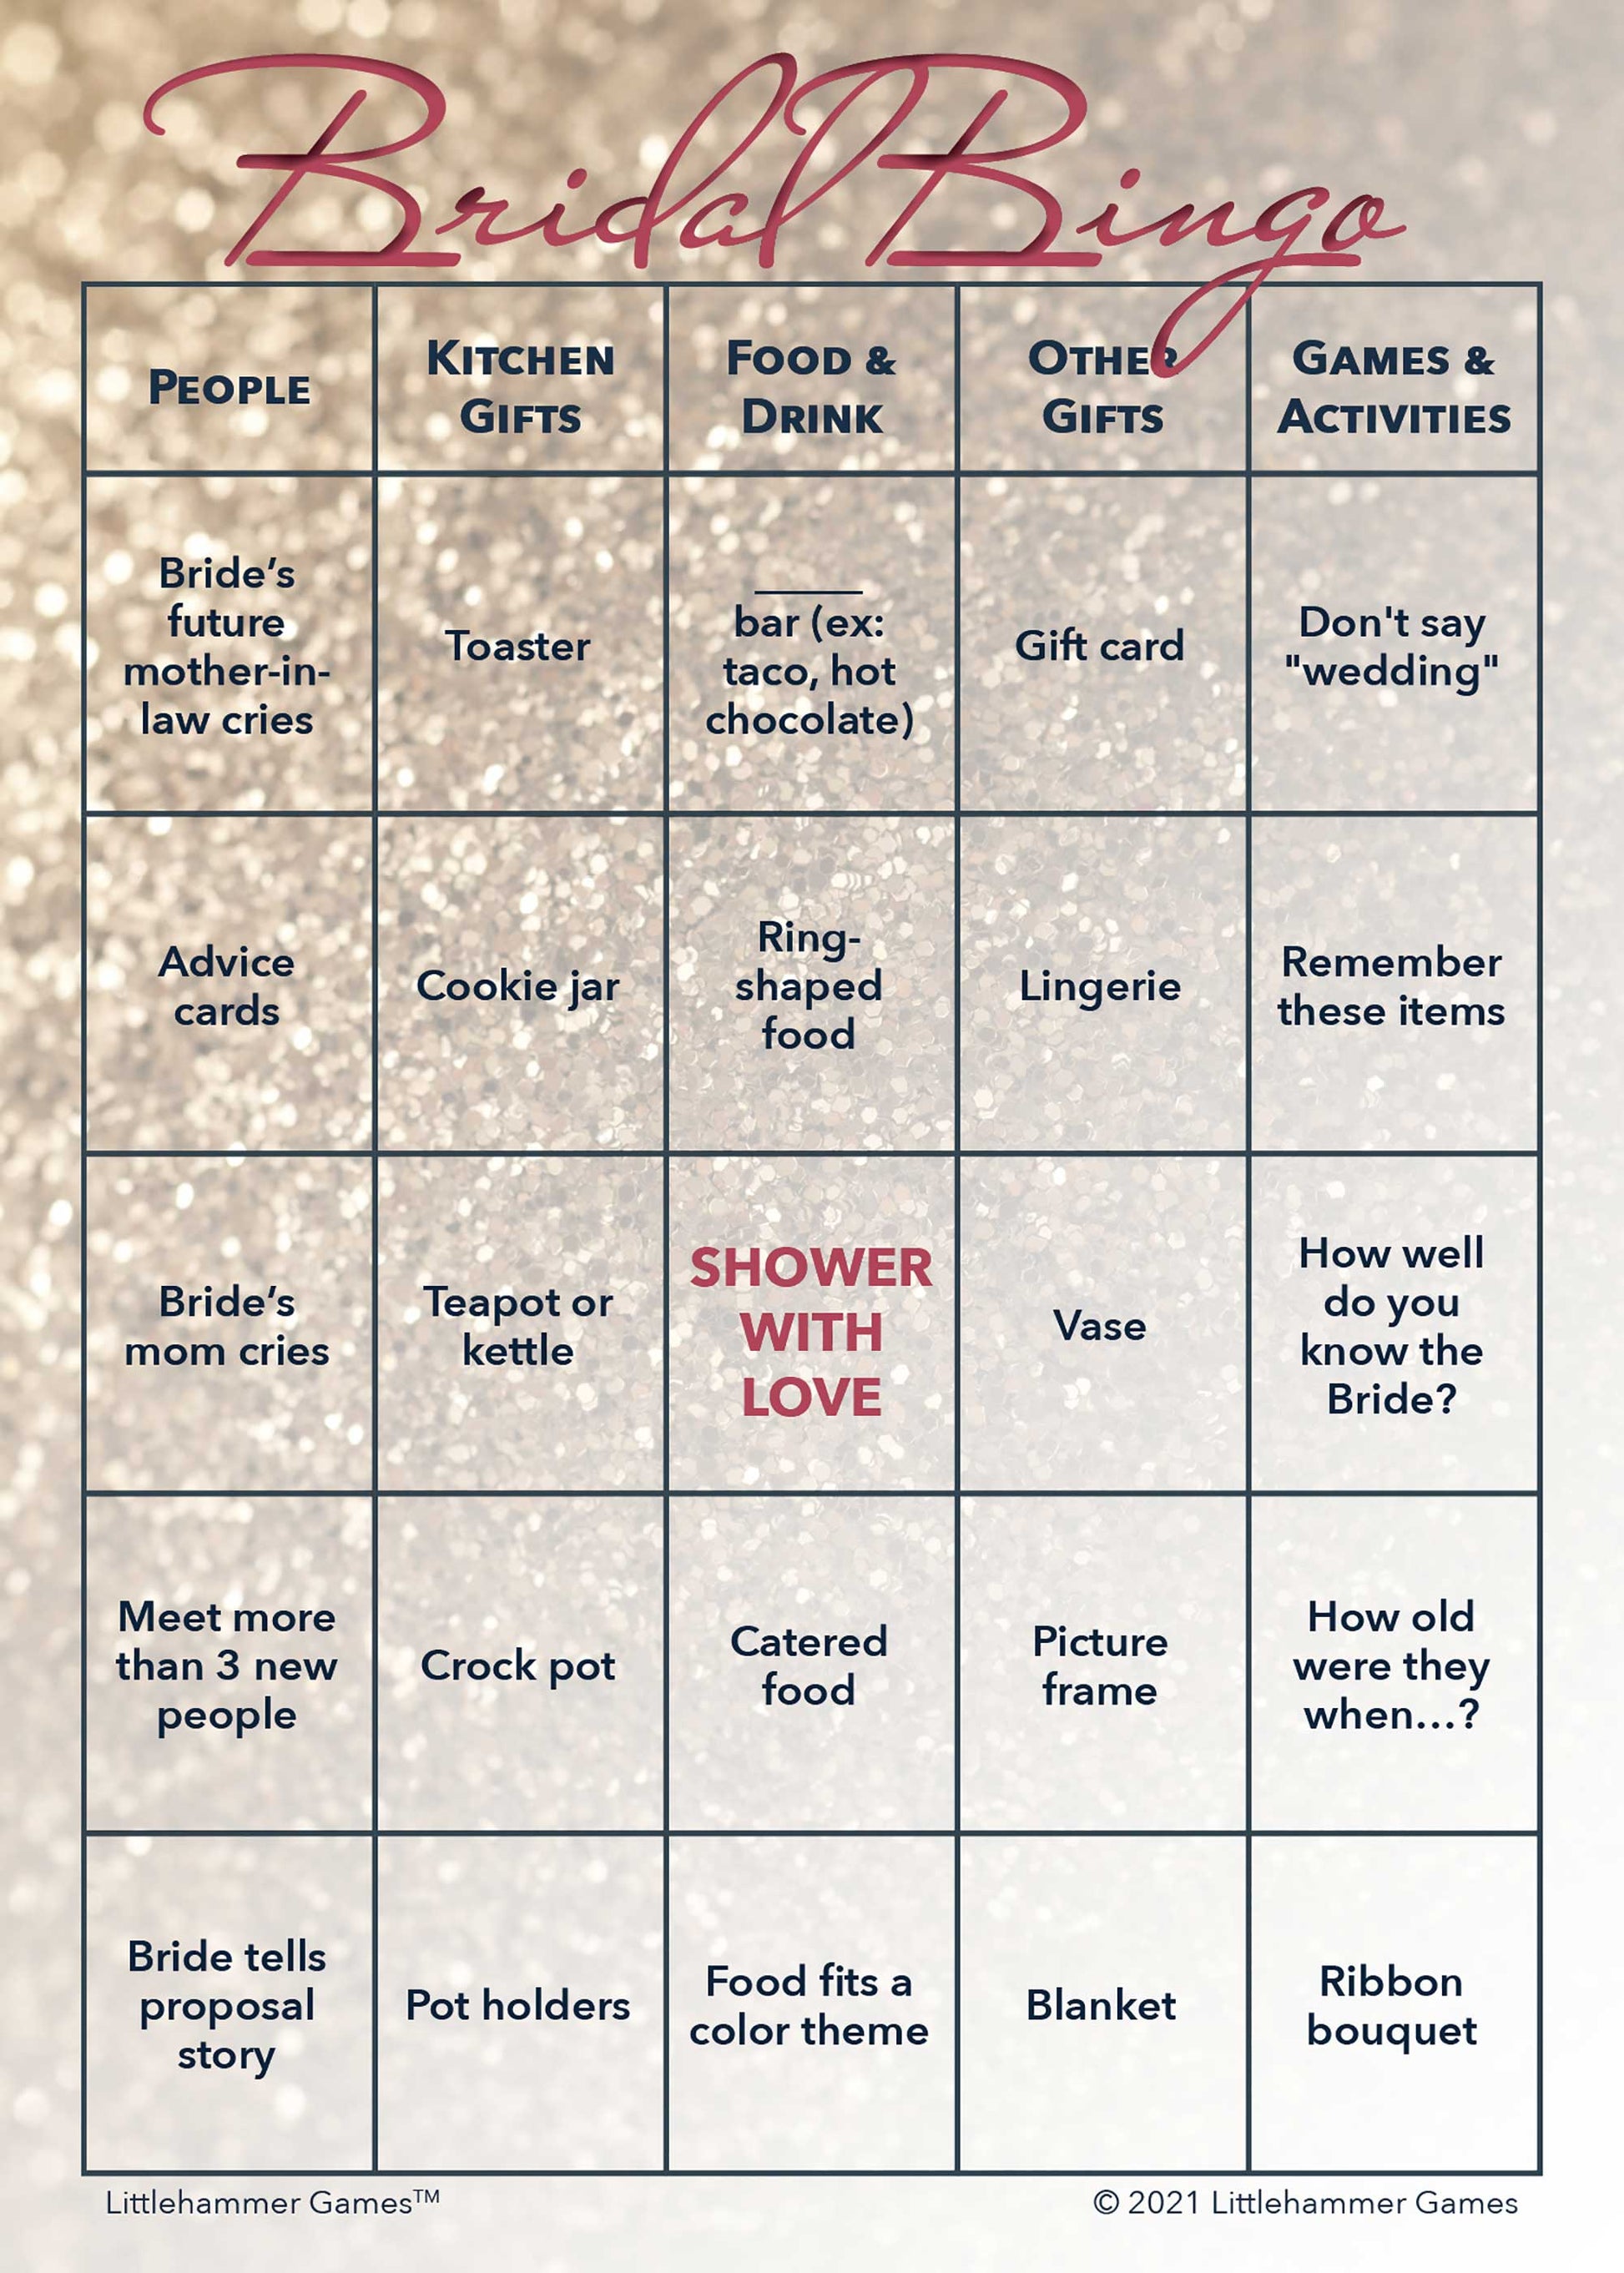 Bridal Bingo game card with a glittery rose gold background